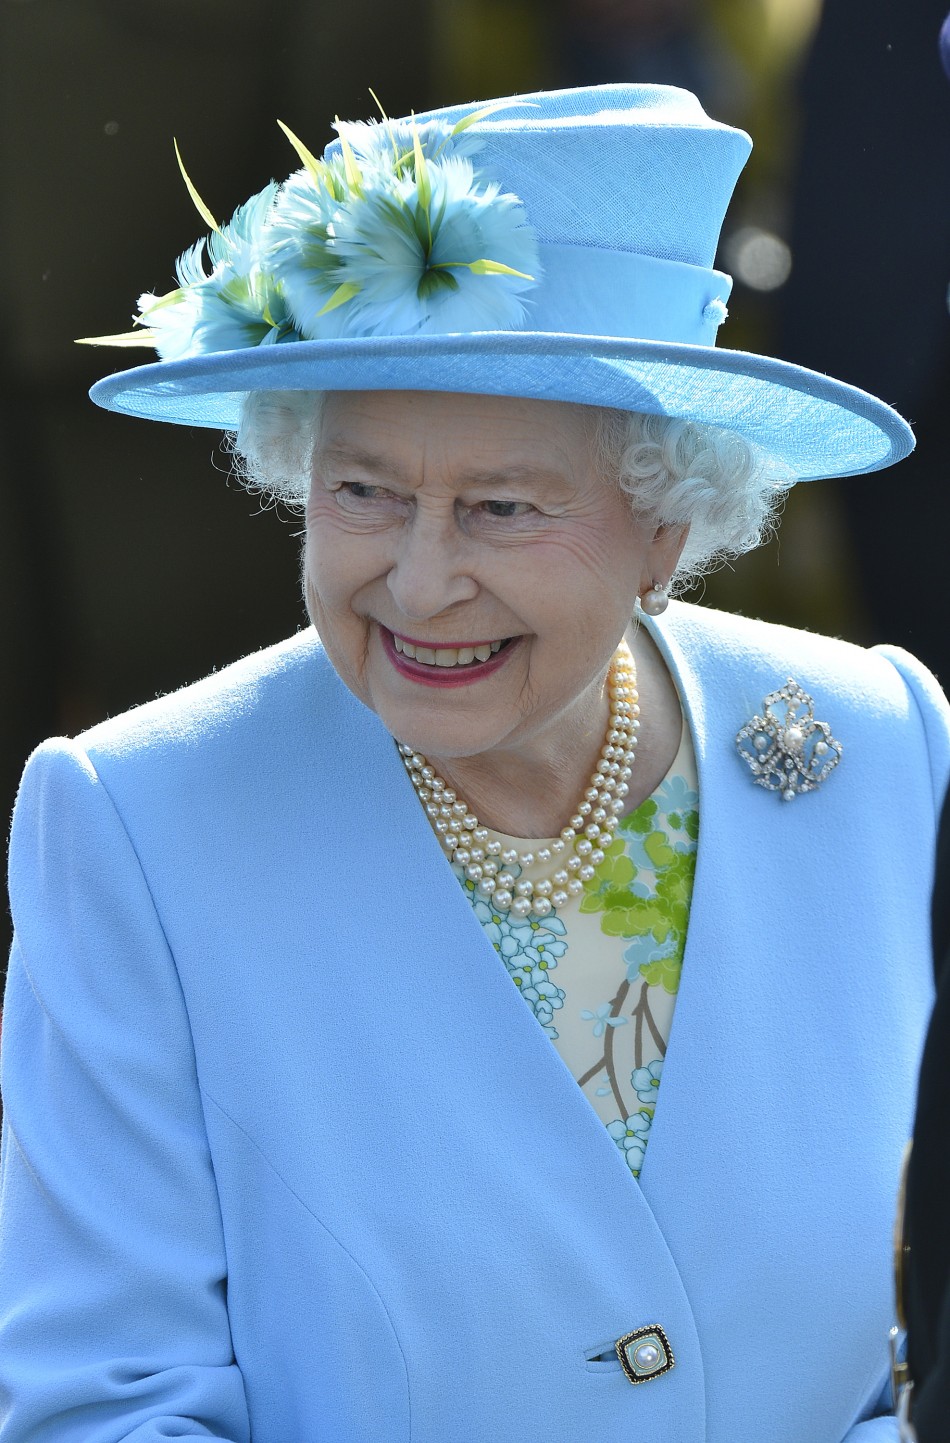 And the Queen’s Favourite Colour Is?